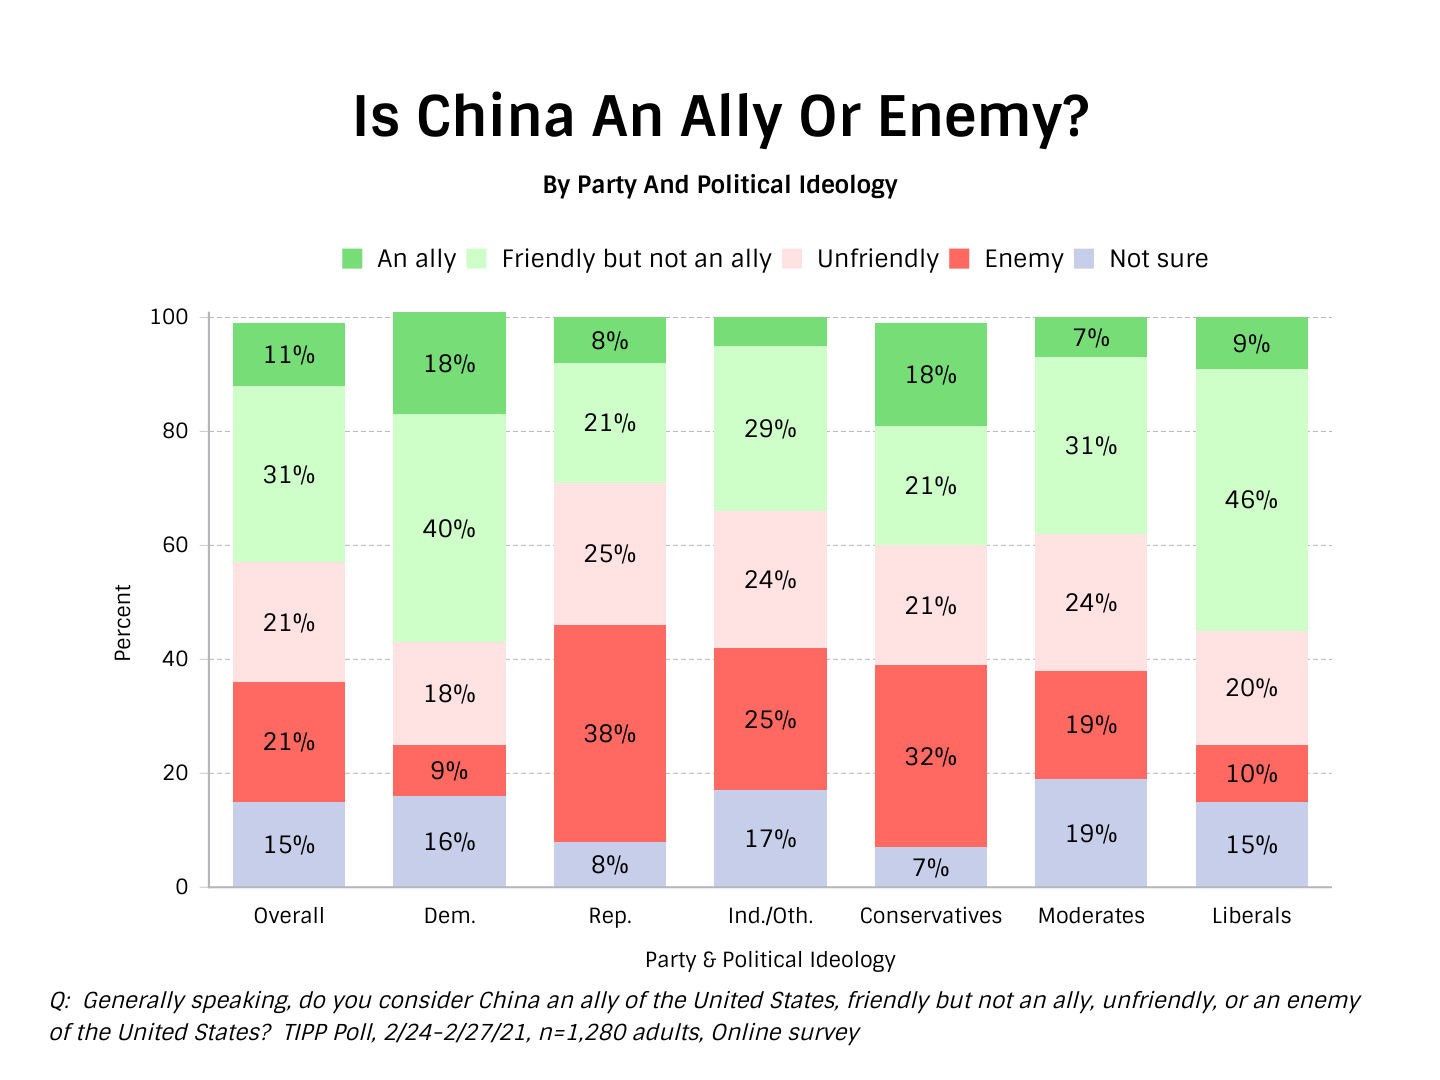 TIPP Poll Results: Americans View on whether china is an ally or an enemy along party and ideological lines